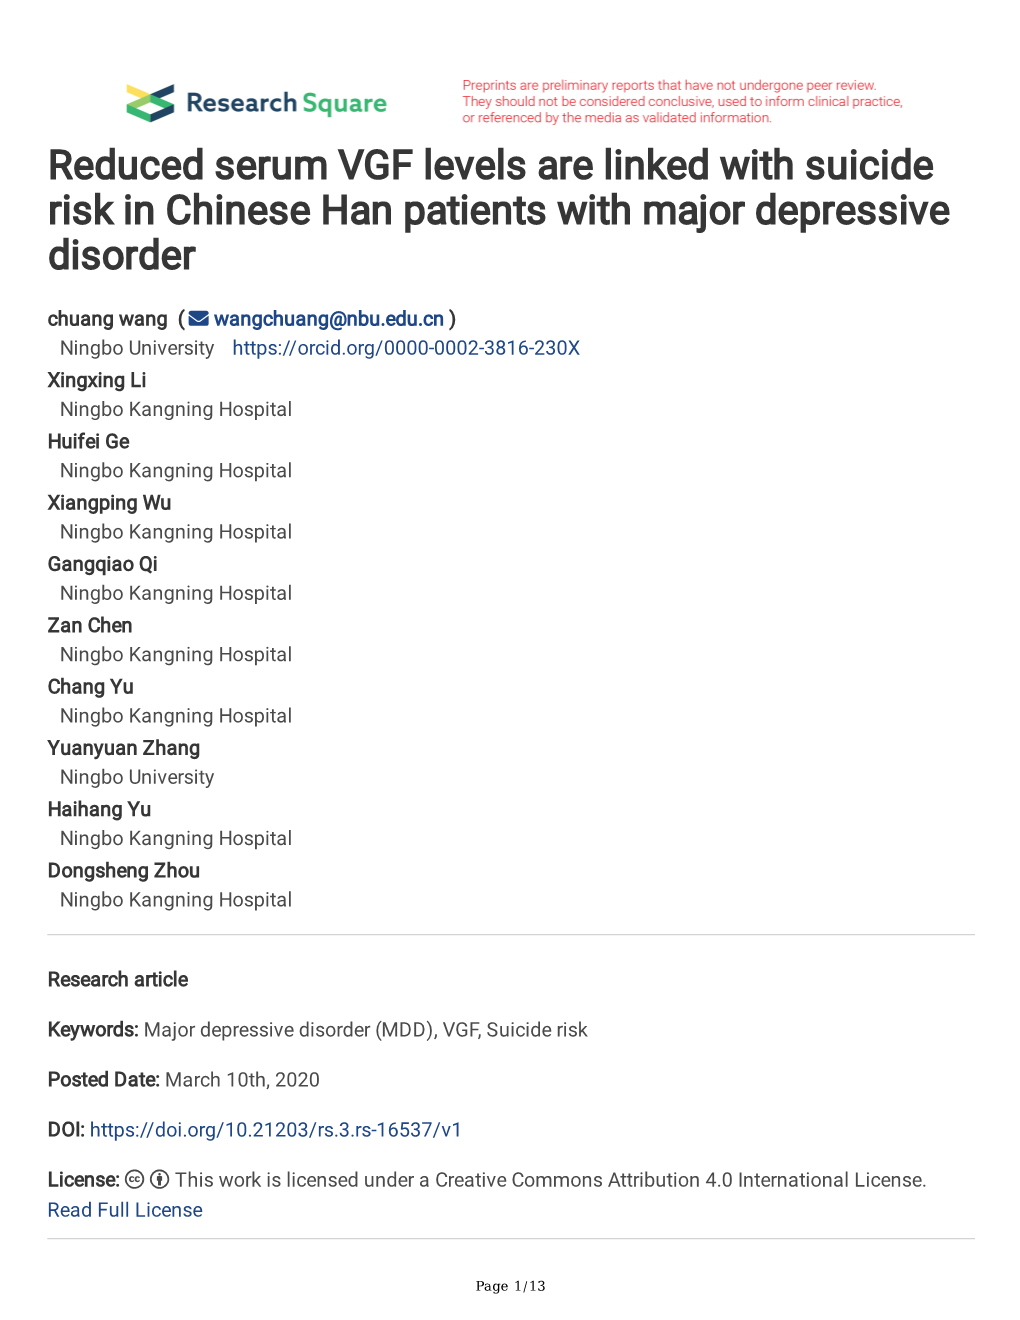 Reduced Serum VGF Levels Are Linked with Suicide Risk in Chinese Han